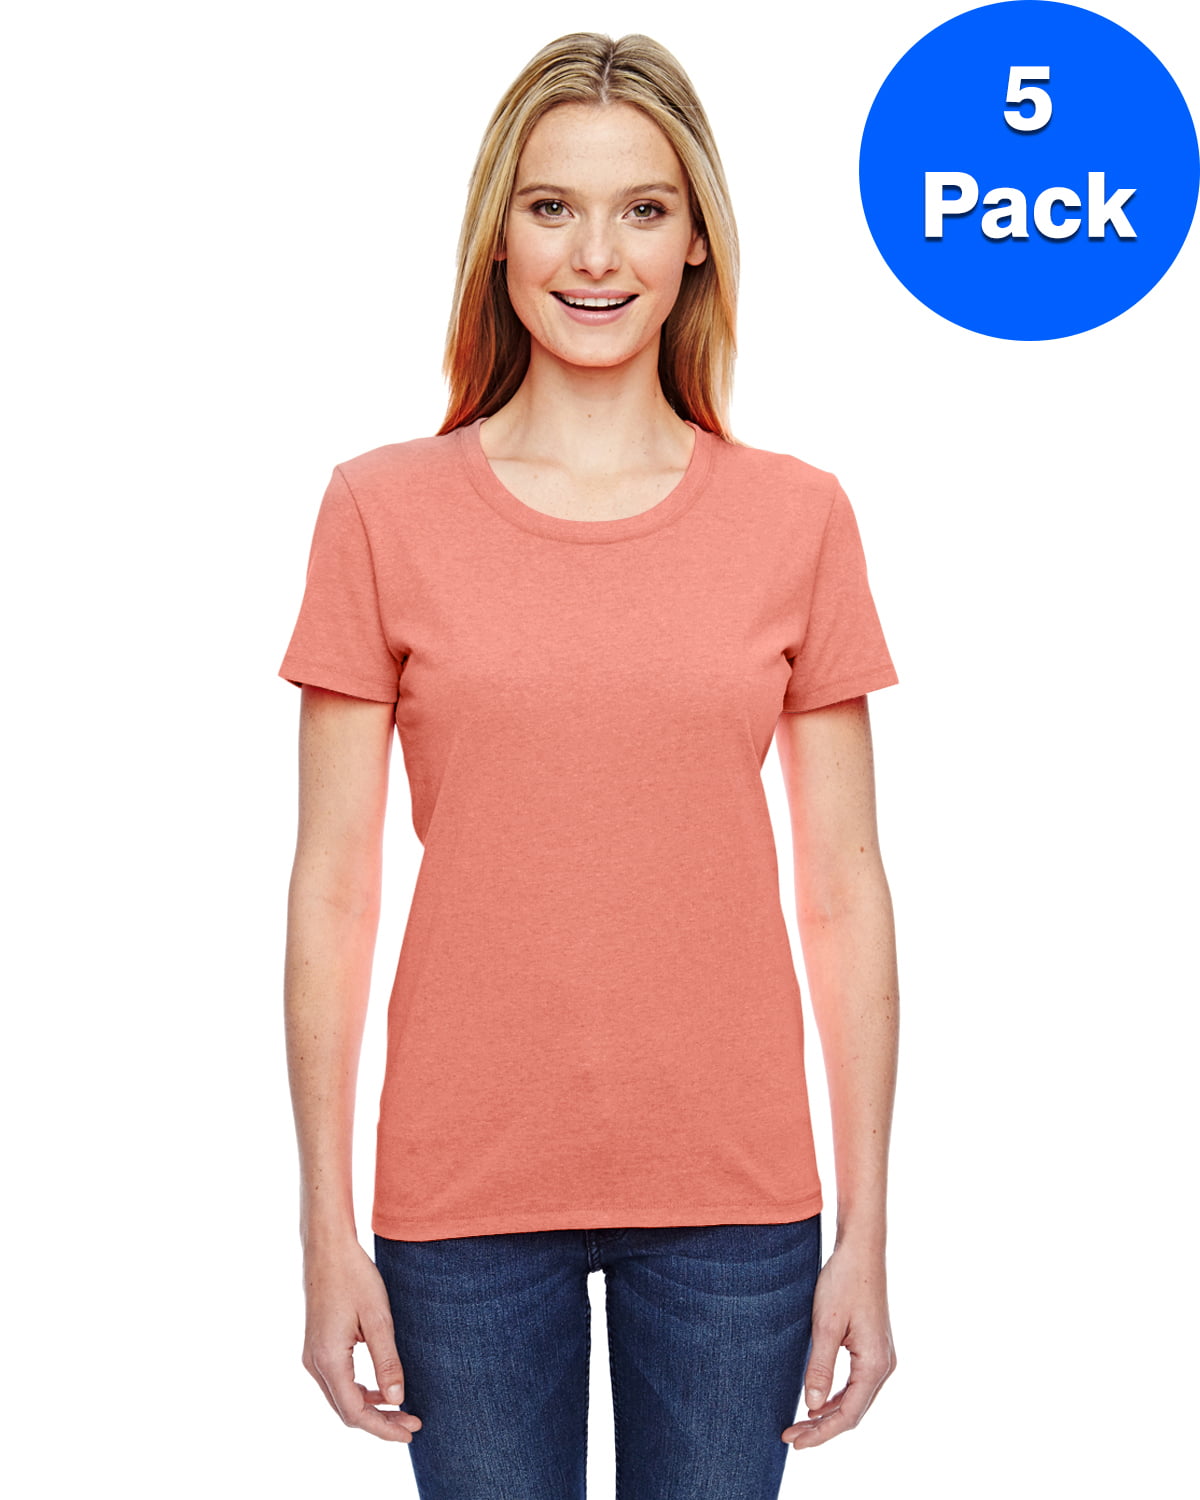 Fruit of the Loom Womens T-Shirt Pack of 5